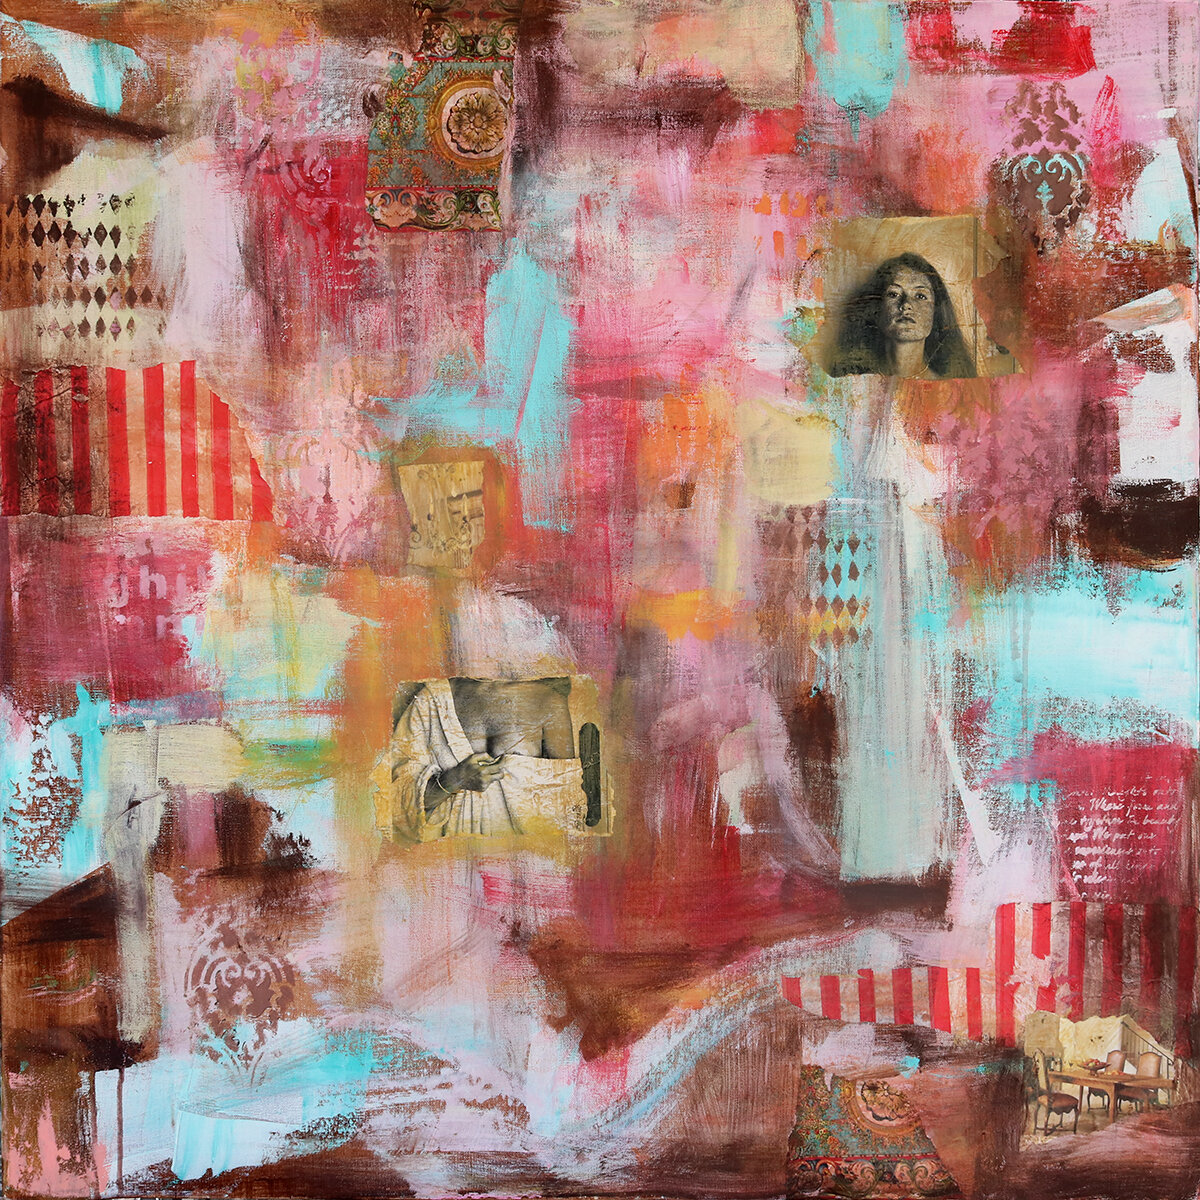   Untitled  Mixed media on canvas, 36x36 inches 